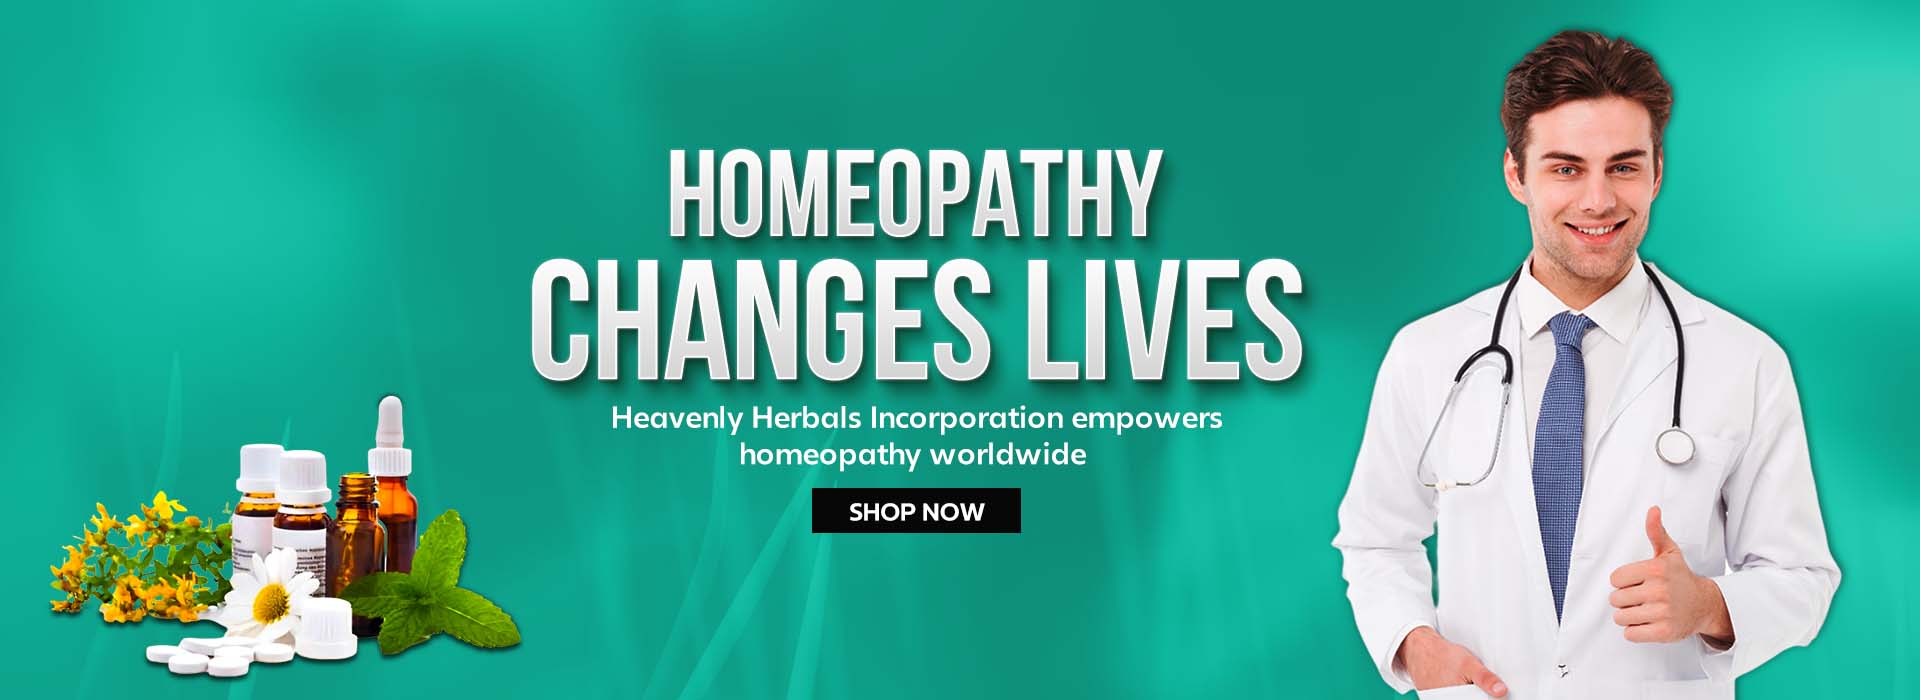 Empowering homeopathy